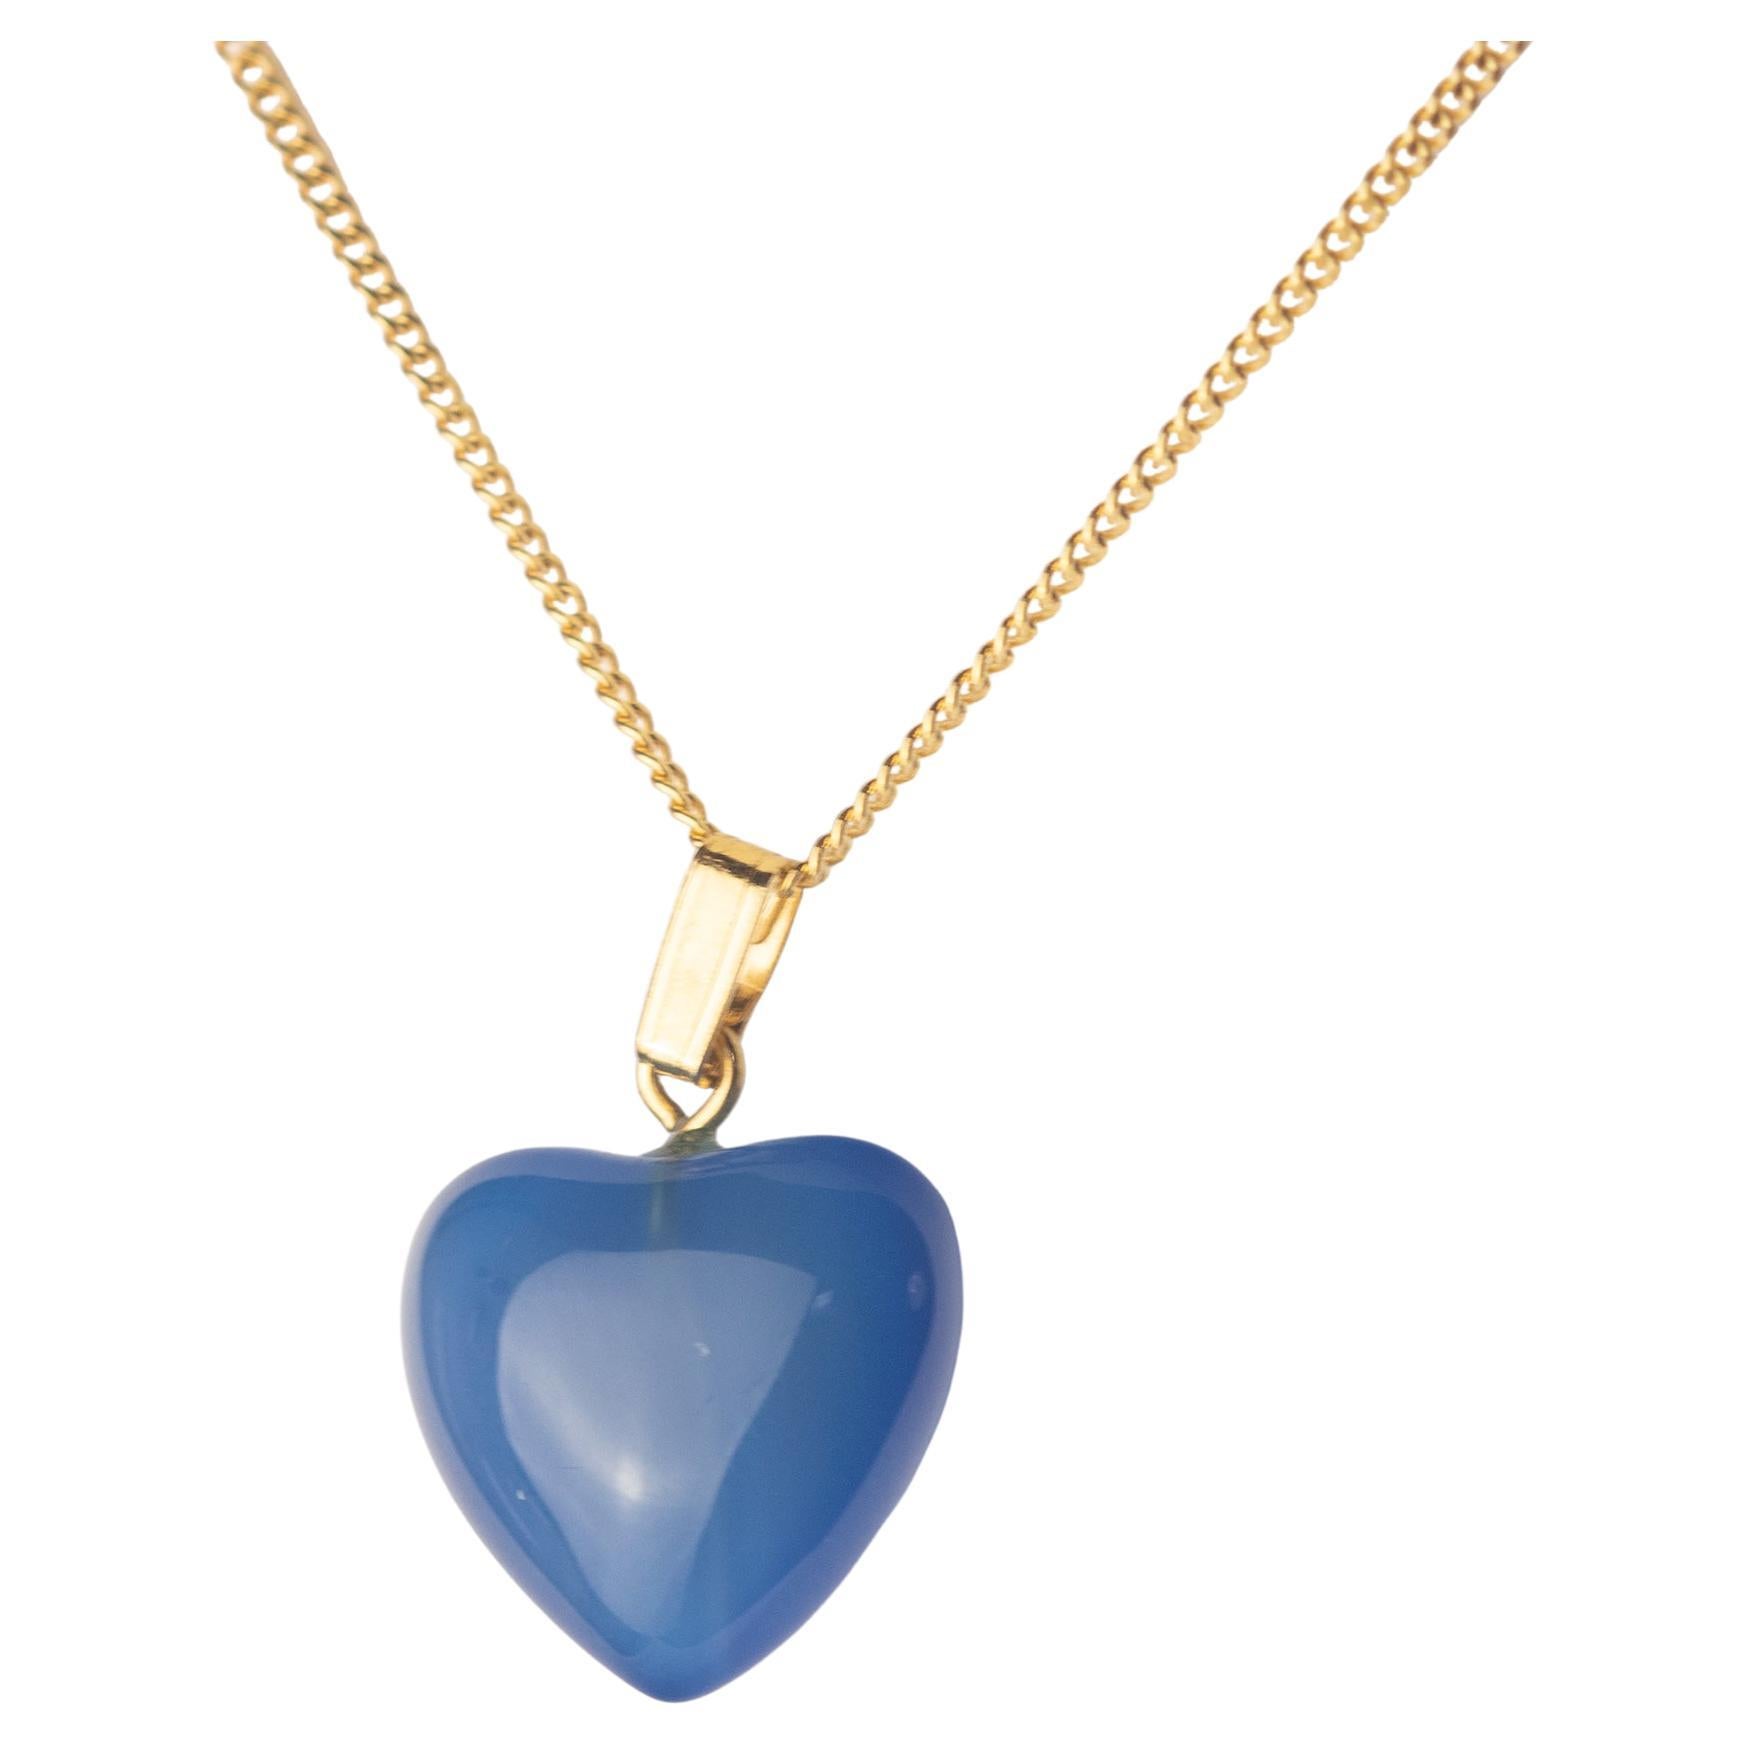 Take love with you everywhere! This breathtaking necklace has a sweet design with the most precious gemstone hanging from a delicate Gold Plate chain. The Natural Blue Quartzactivates spiritual awareness, opens intuition and enhances your senses to